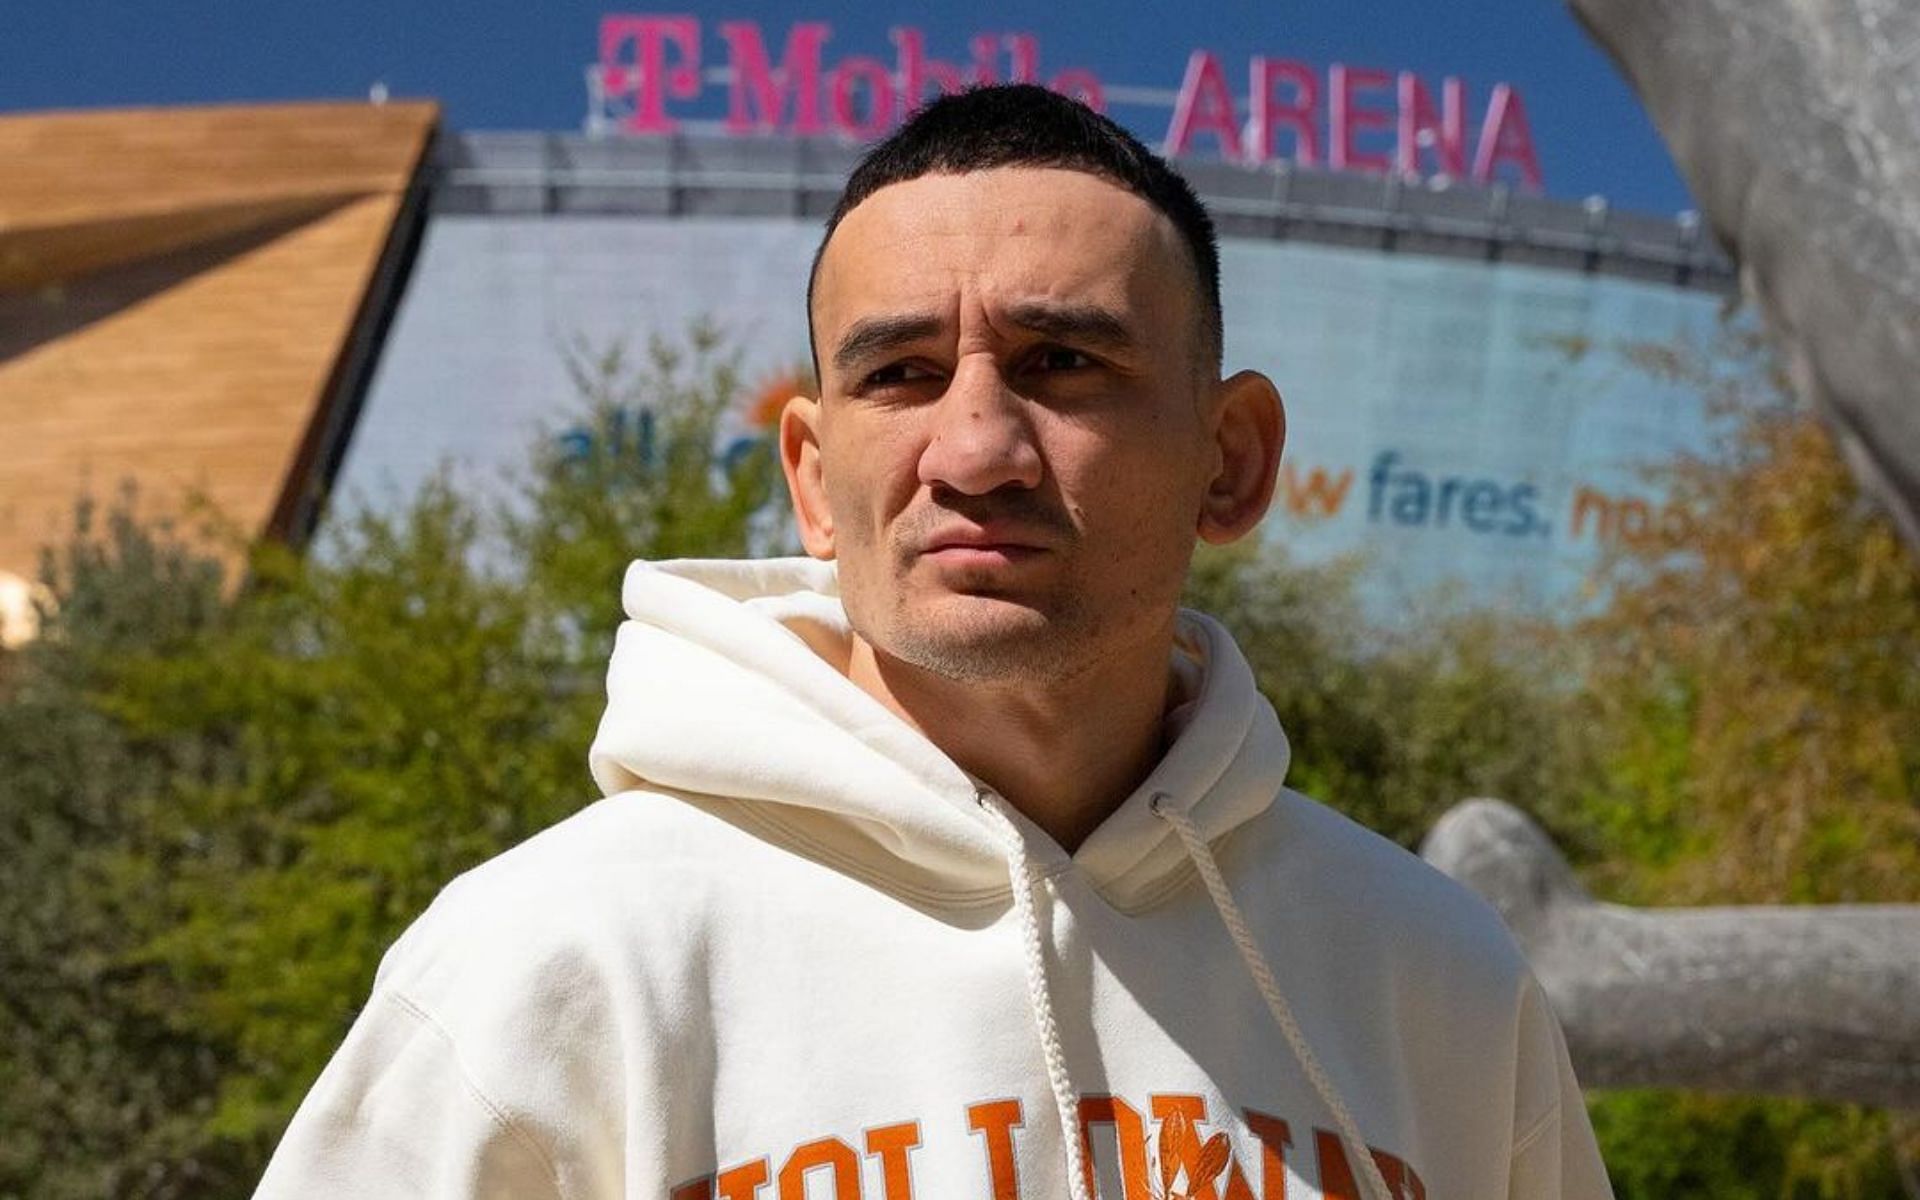 Max Holloway is widely revered for his exciting fighting style and legendary chin [Image courtesy: @blessedmma on Instagram]